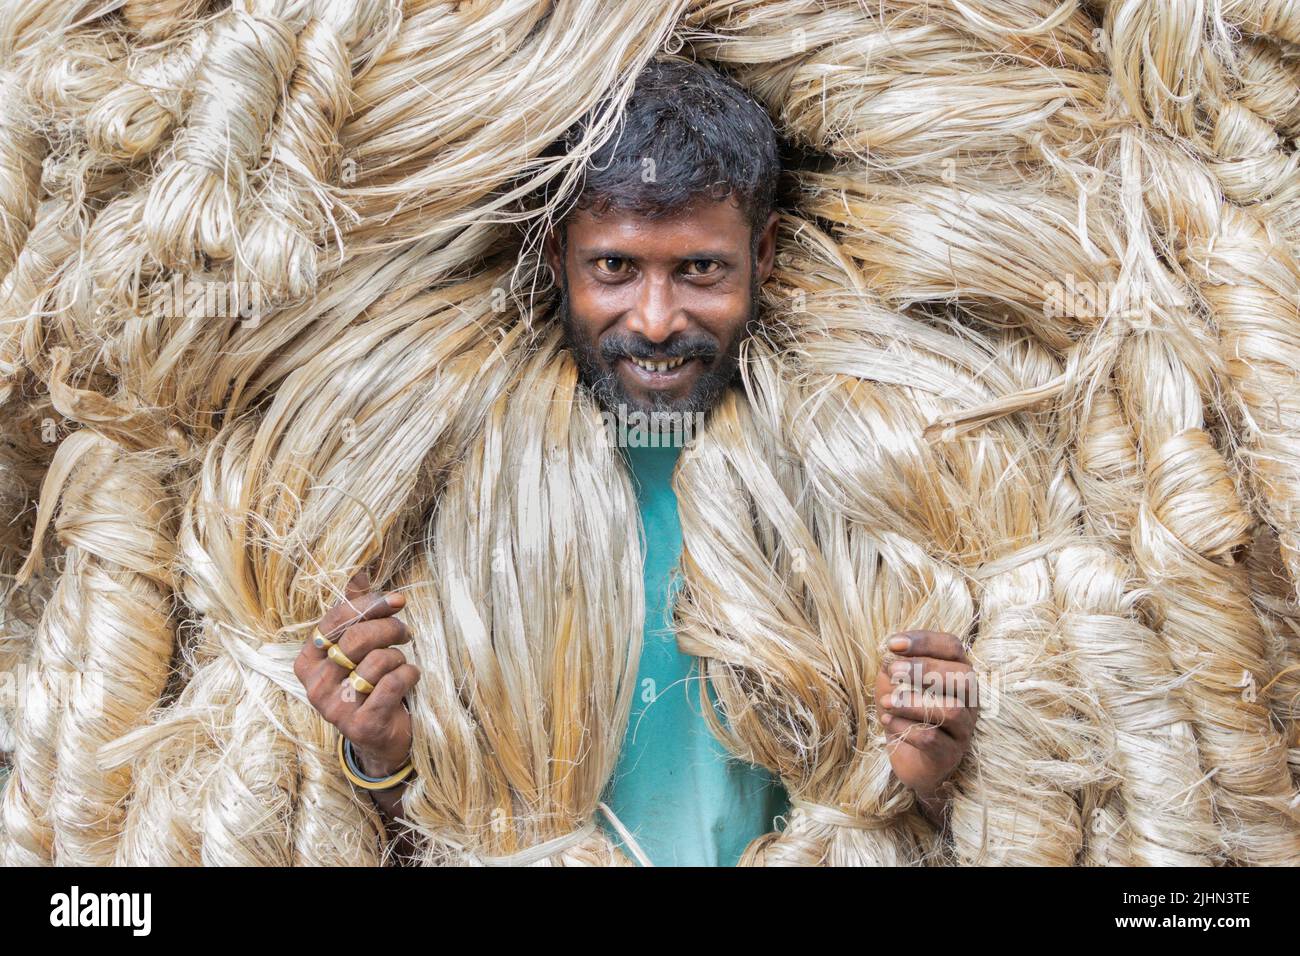 July 20, 2022, Manikganj, Dhaka, Bangladesh: Workers carry 50kg bundles of newly harvested jute above their heads to sell at a market in Manikganj, Bangladesh. The Golden Fiber of Bangladesh, Jute offers an alternative to plastic bags because of its biodegradable properties. The diligent workers appear to be wearing large golden wigs and their bodies are enveloped with the heavy natural fibers, with only their faces visible as they each carry around 50kg of jute on their shoulders. Bangladesh is the second biggest producer of jute after India and the largest exporter of jute and jute products Stock Photo